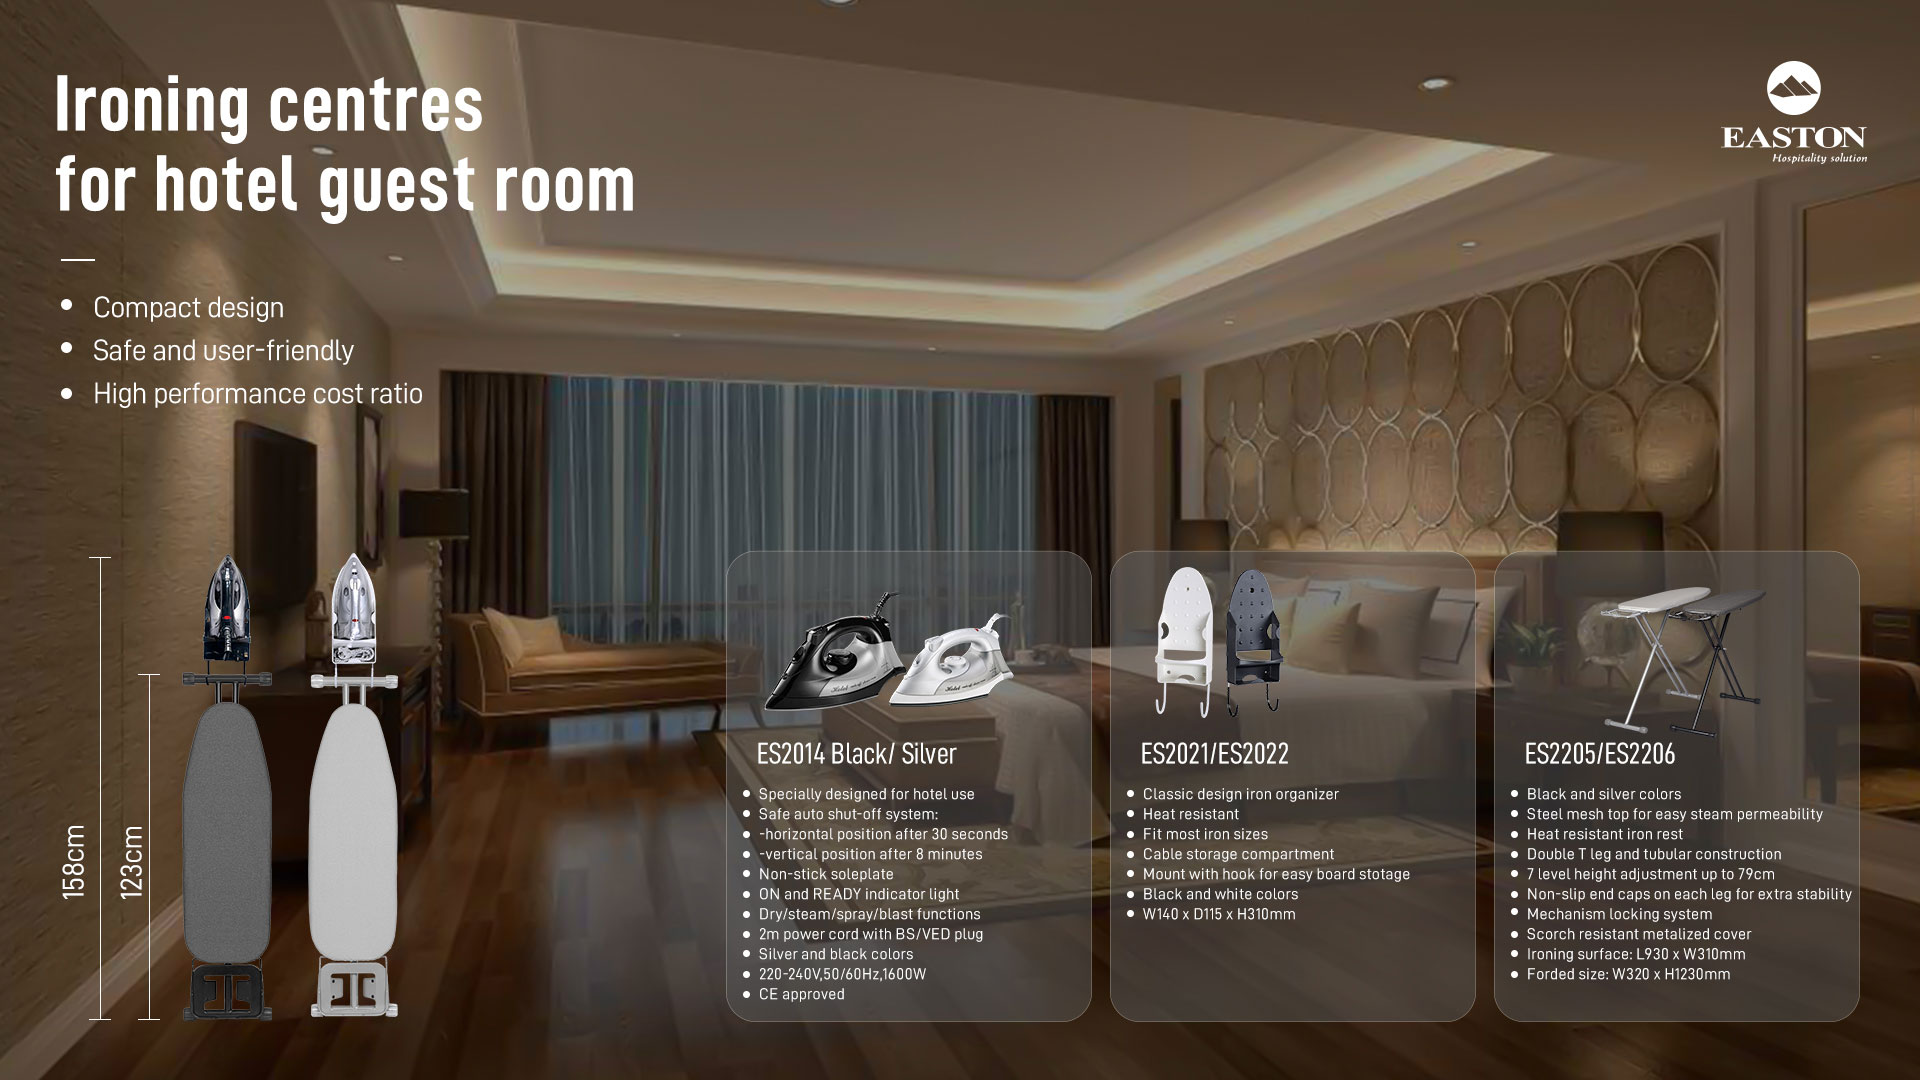 lroning centres for hotel guest room